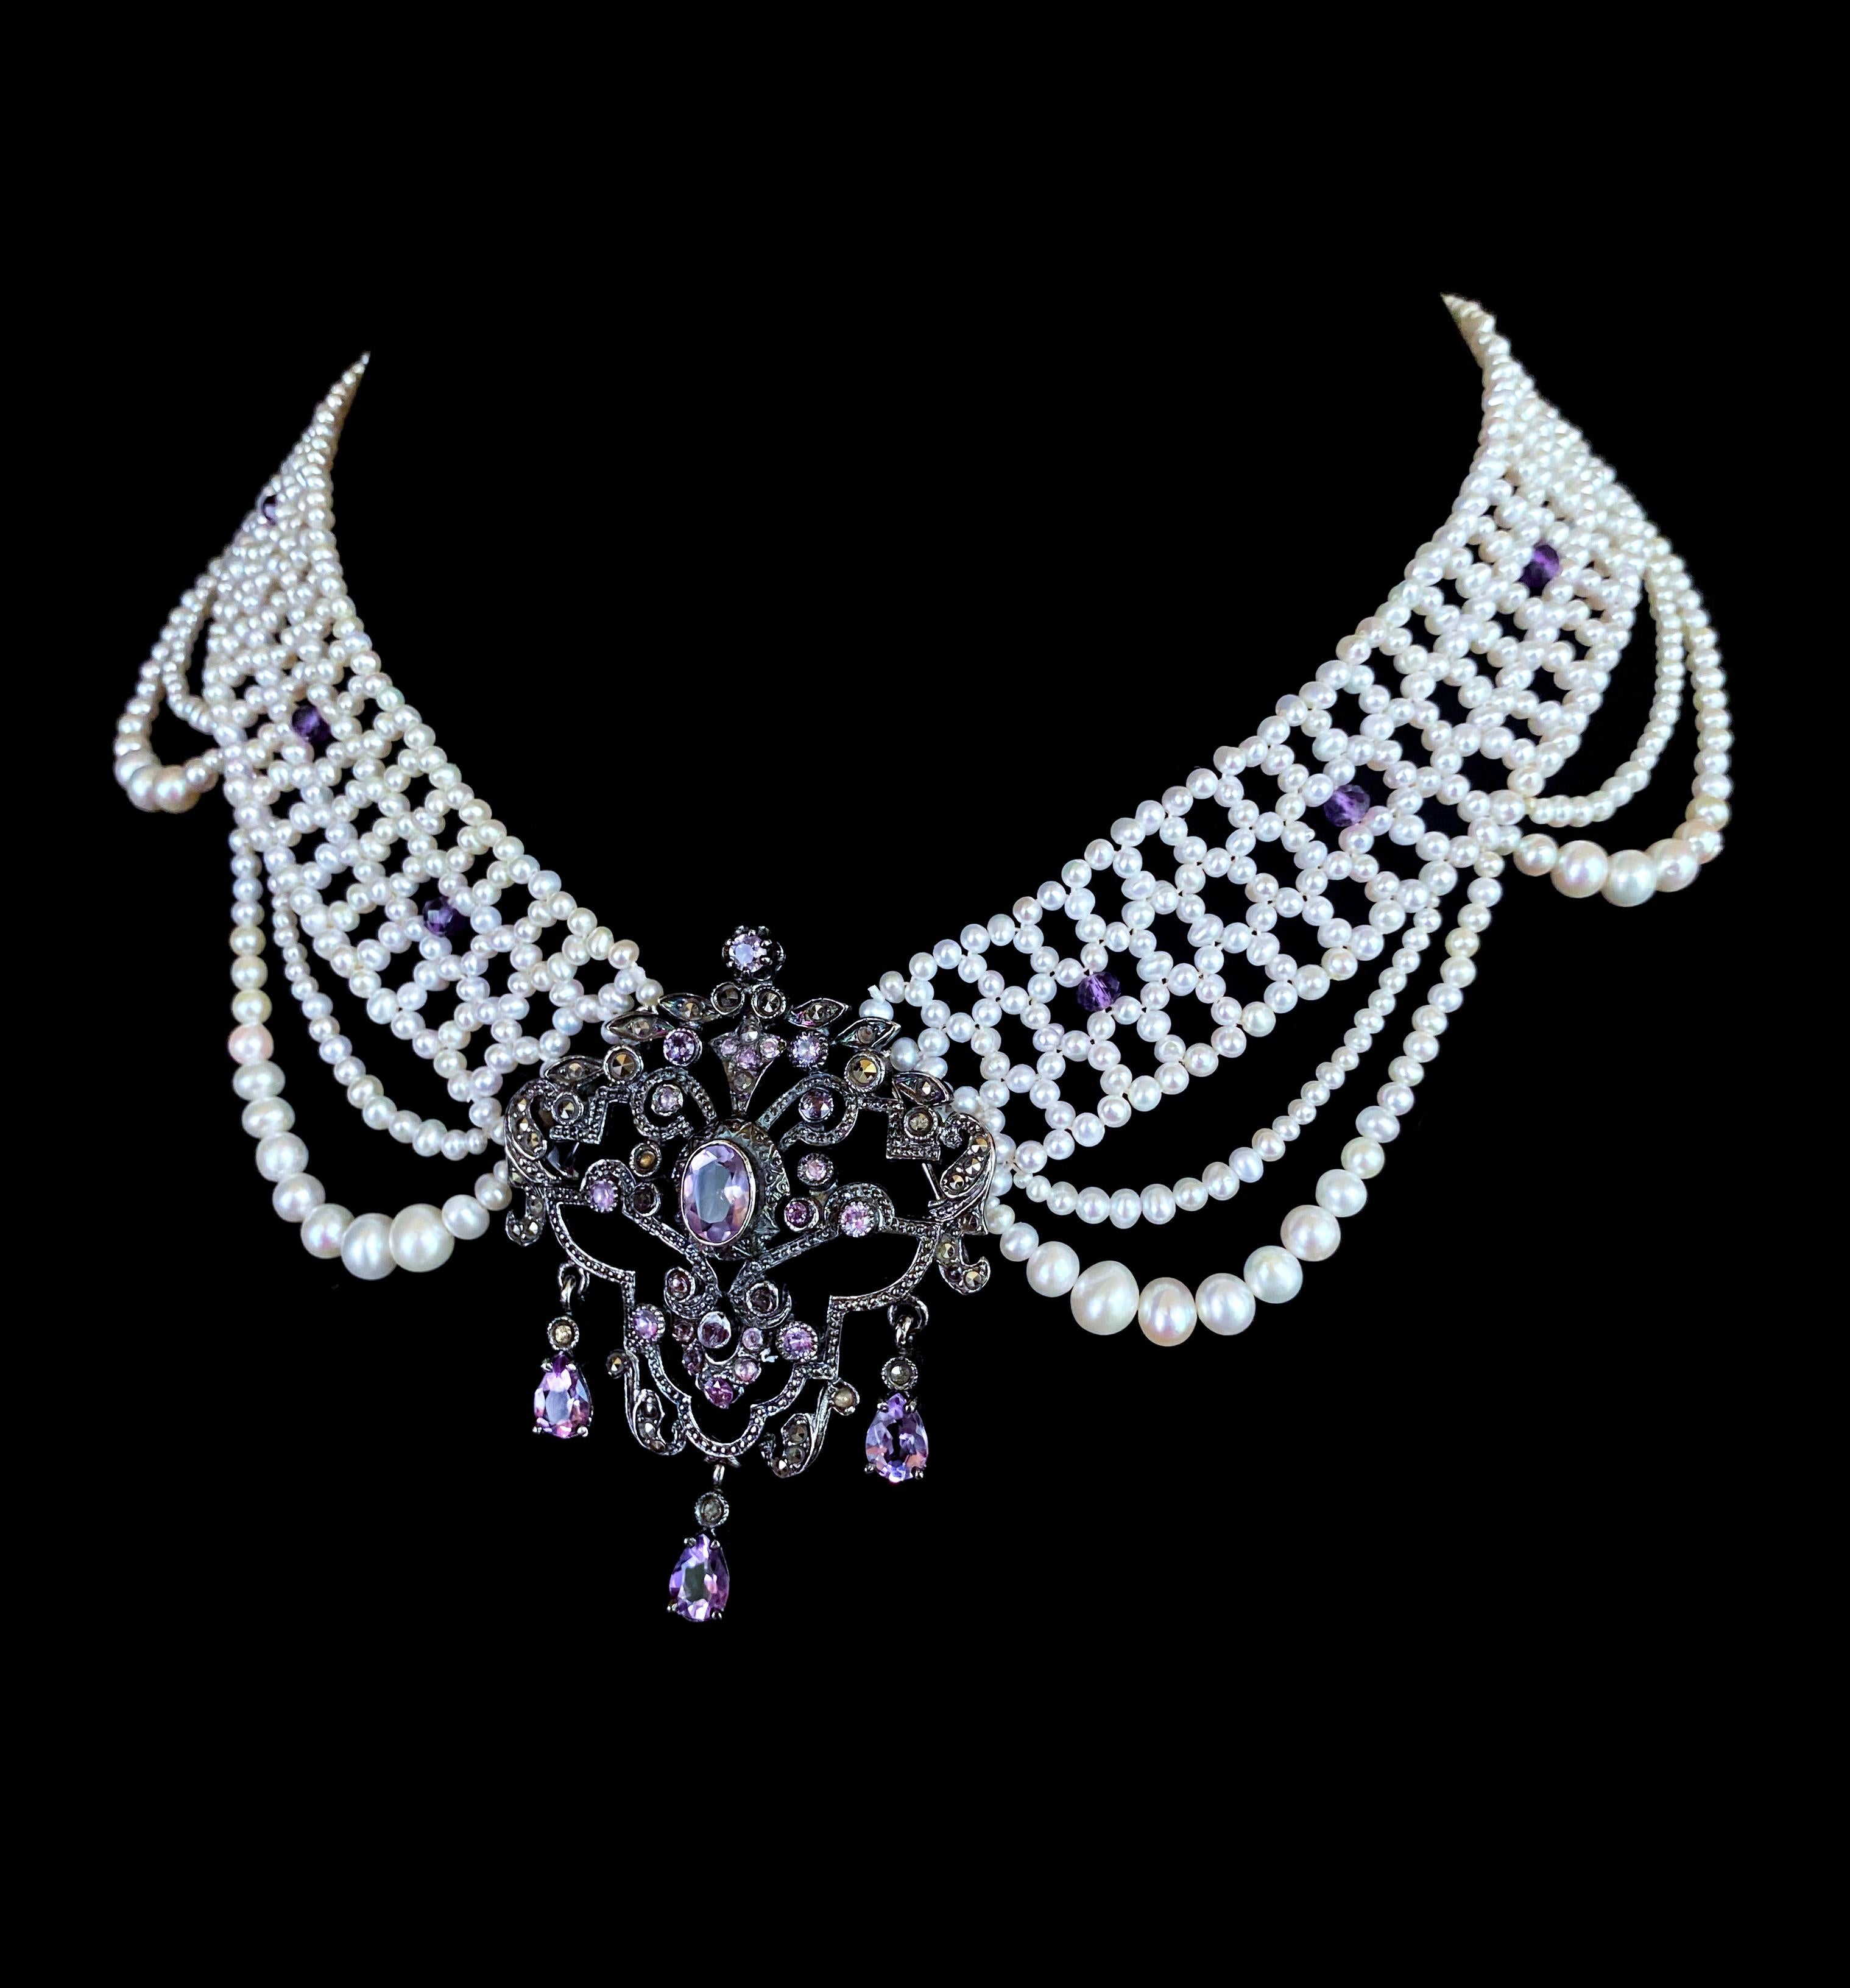 Marina J. Unique Pearl Draped Necklace with Vintage Amethyst Silver Centerpiece For Sale 3